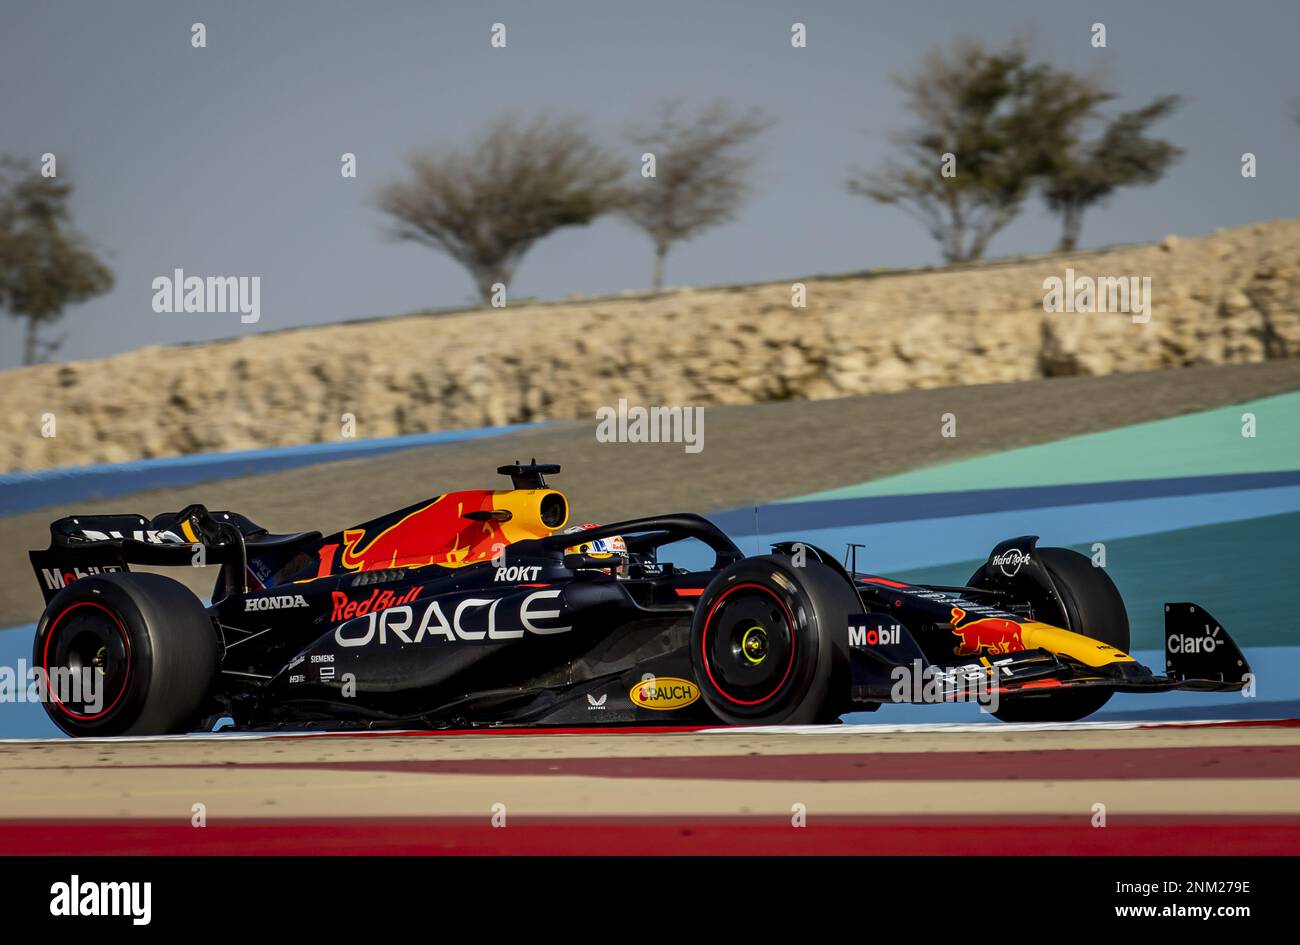 BAHRAIN - 24/02/2023, Max Verstappen (Red Bull Racing) during the second day of testing at the Bahrain International Circuit ahead of the start of the Formula 1 season. ANP SEM VAN DER WAL netherlands out - belgium out Credit: ANP/Alamy Live News Stock Photo